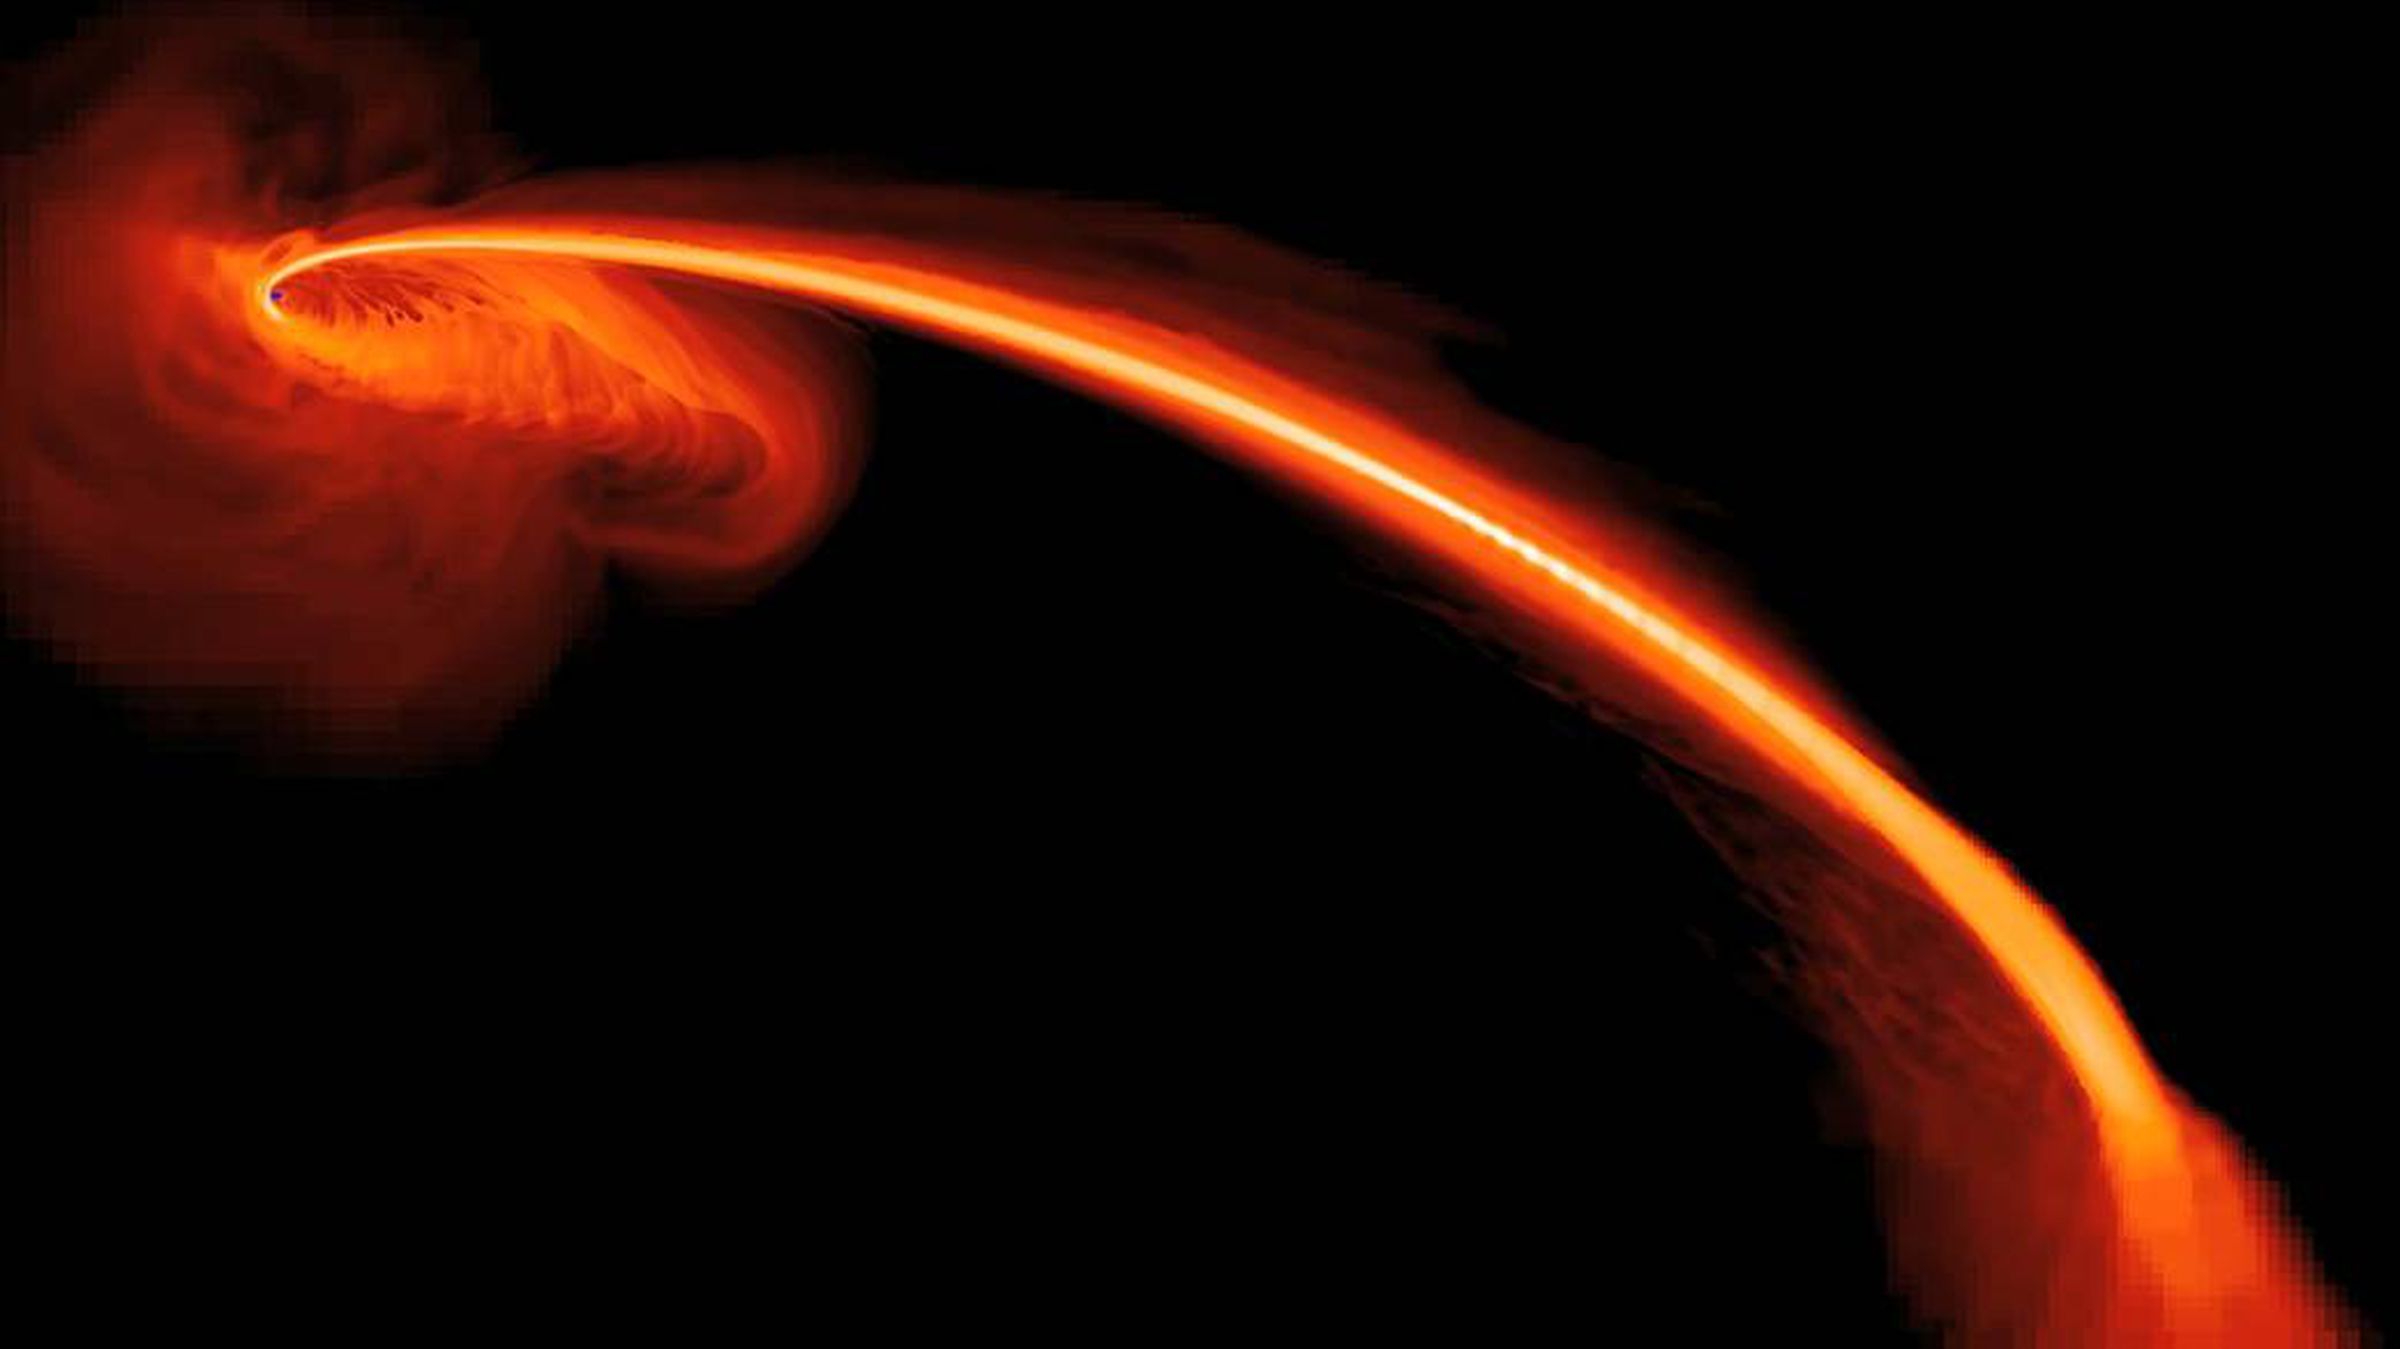 Black holes don’t play well with others. In this computer-generated image, a black hole (top left) tears apart a star.